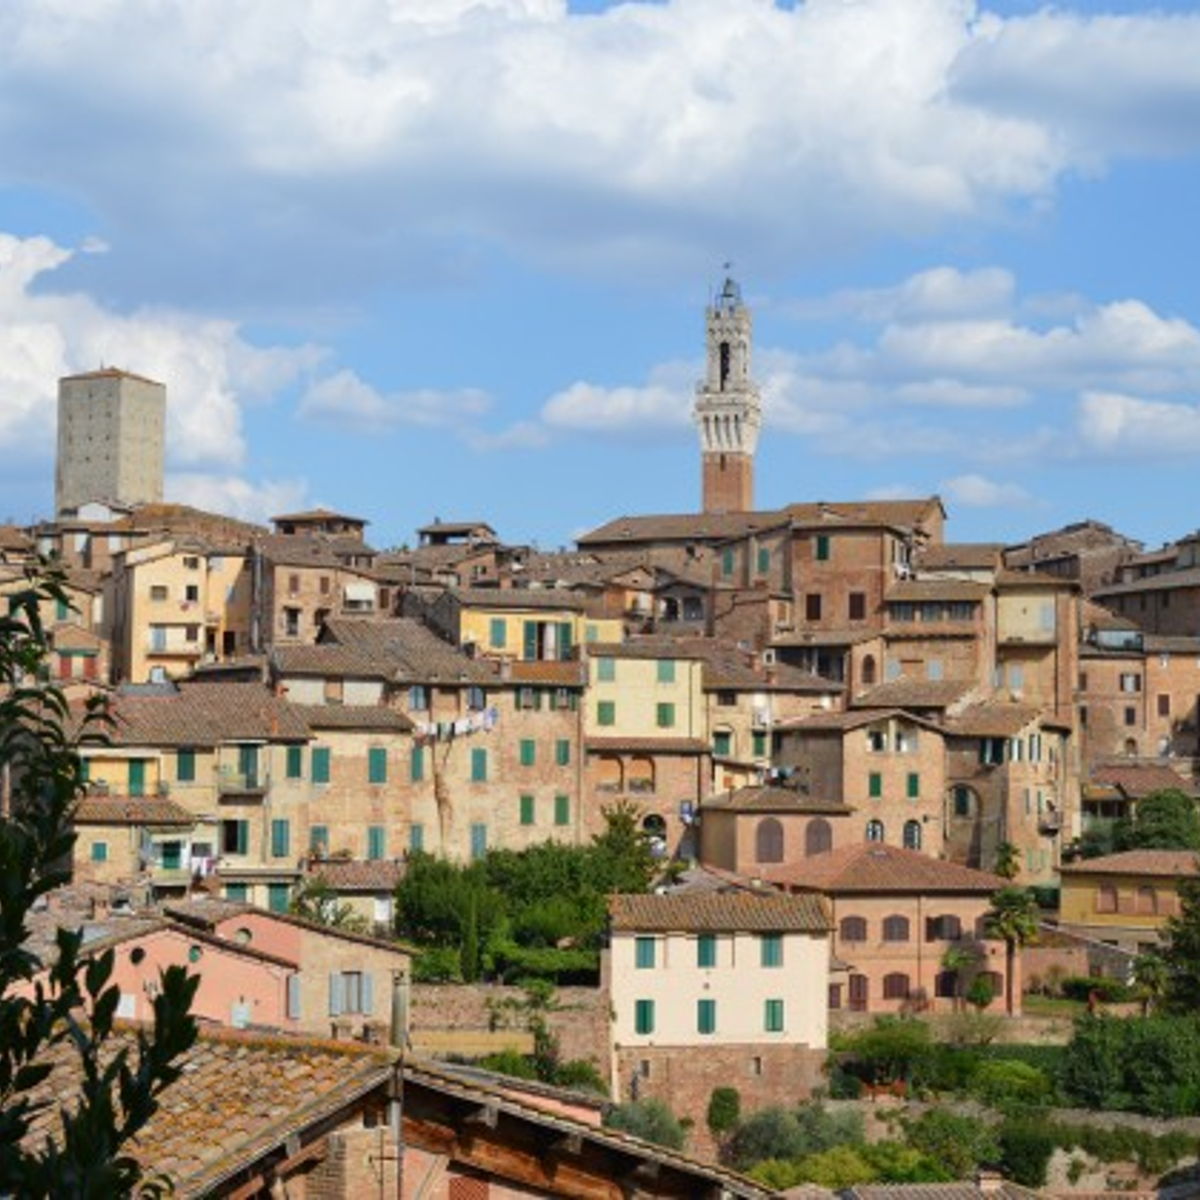 Private walking tour in Siena and Bakery